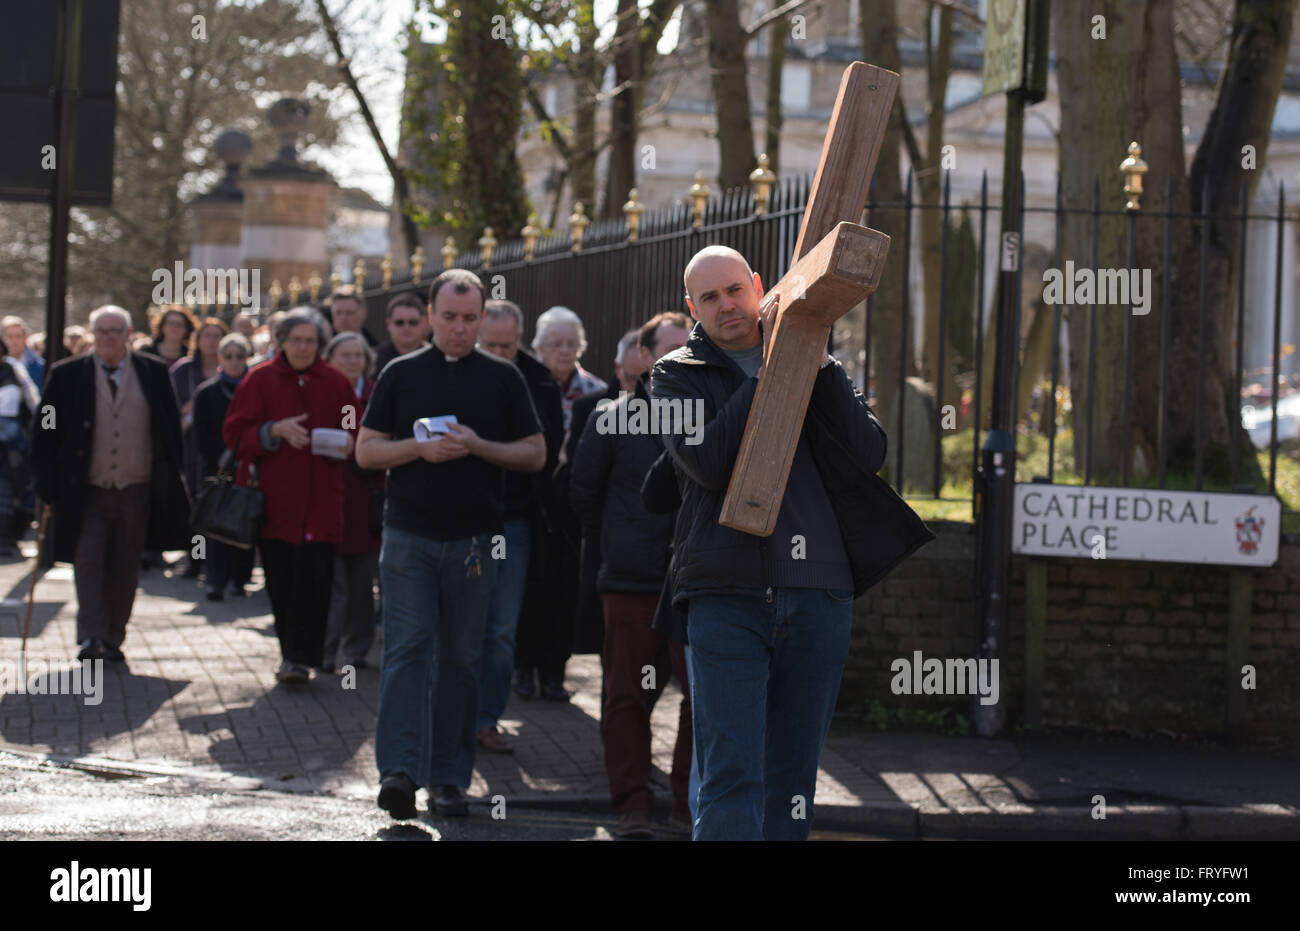 Brentwood, Essex, UK. 25th March, 2016. Easter Walk of Witness in Brentwood, Essex. The cross leaves Brentwood Cathedral for the Walk for Witness Credit:  Ian Davidson/Alamy Live News Stock Photo